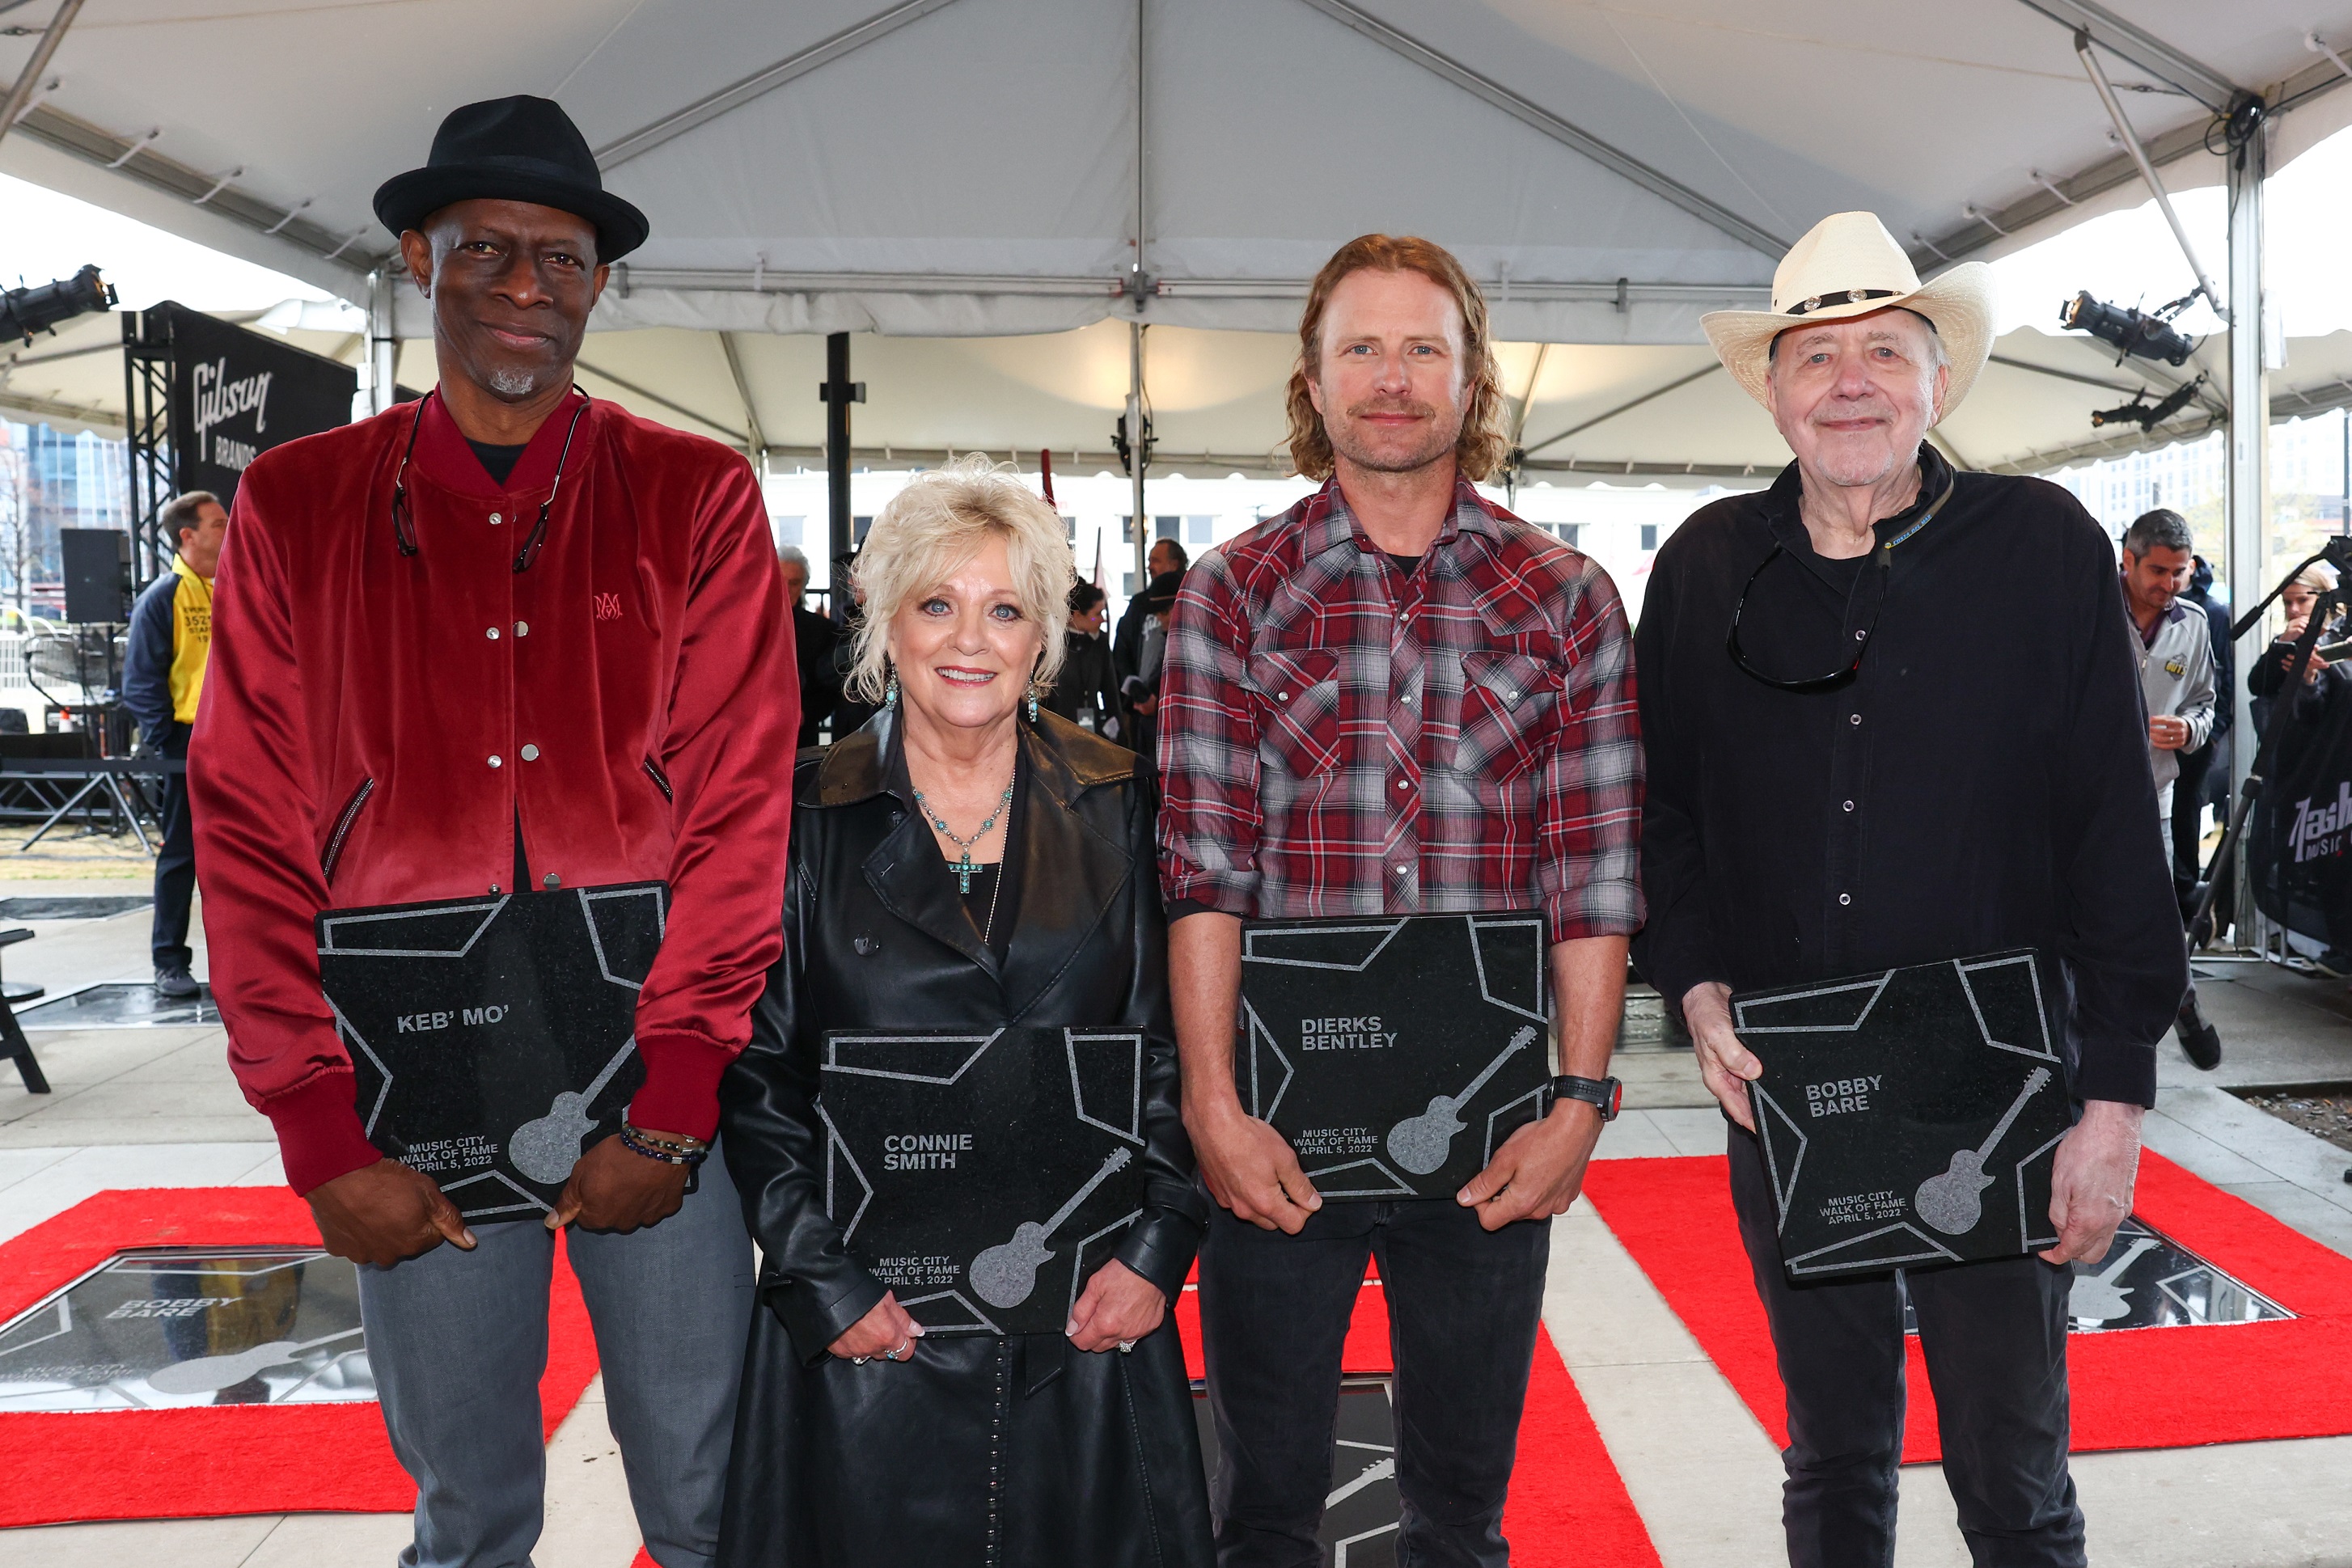 Bobby Bare, Dierks Bentley, Keb' Mo' and Connie Smith Inducted into the Music City Walk of Fame